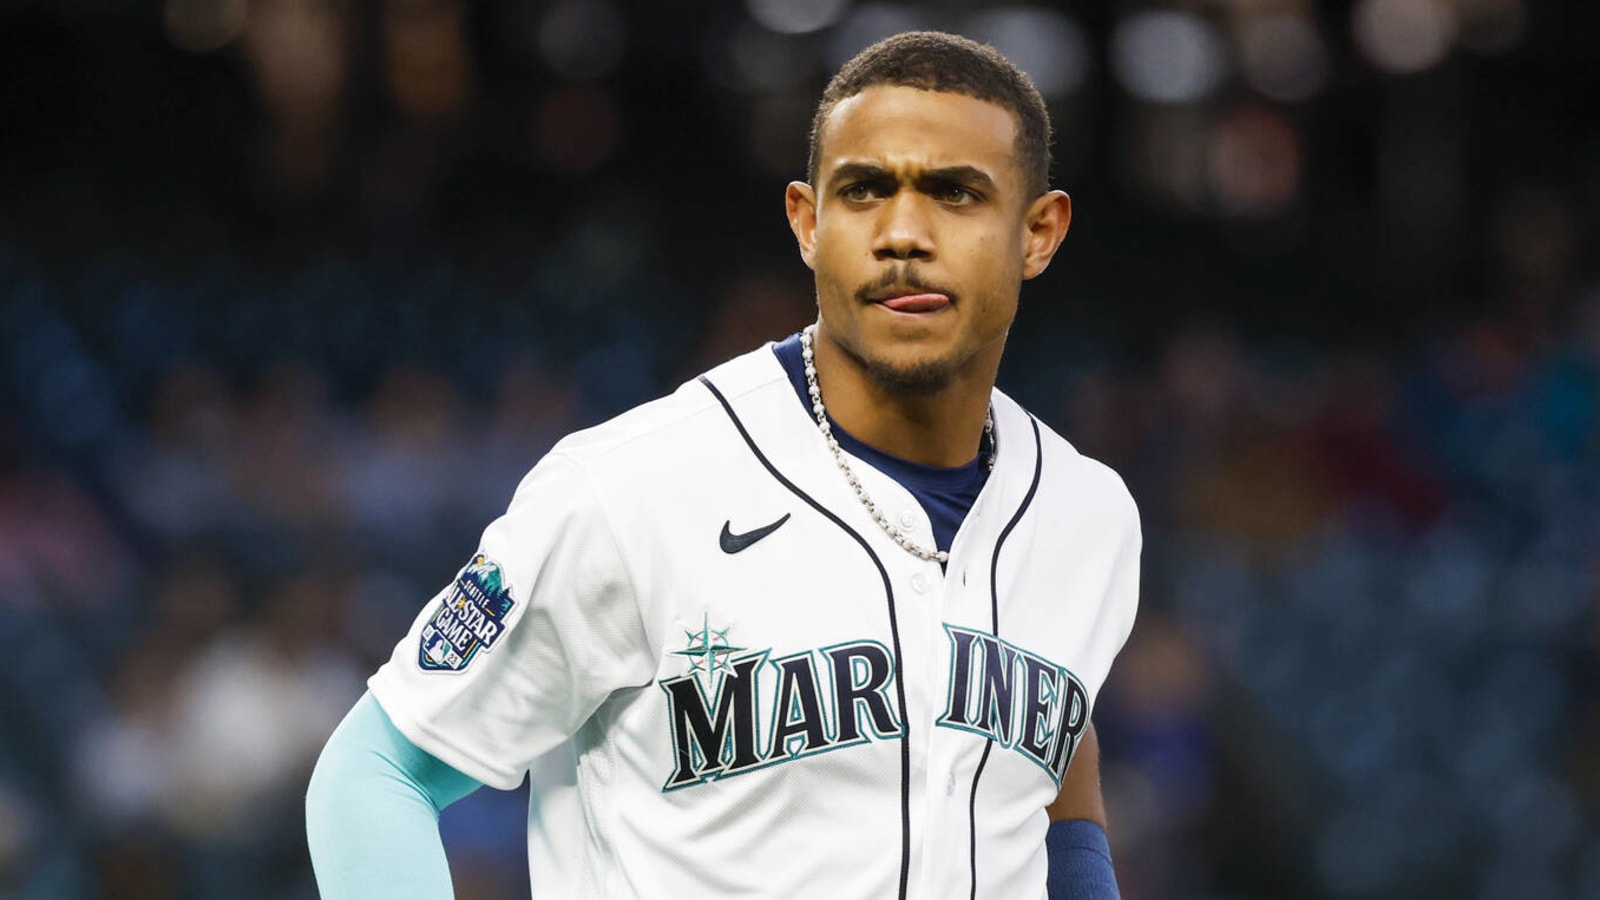 A closer look at Mariners' Julio Rodriguez's offensive struggles